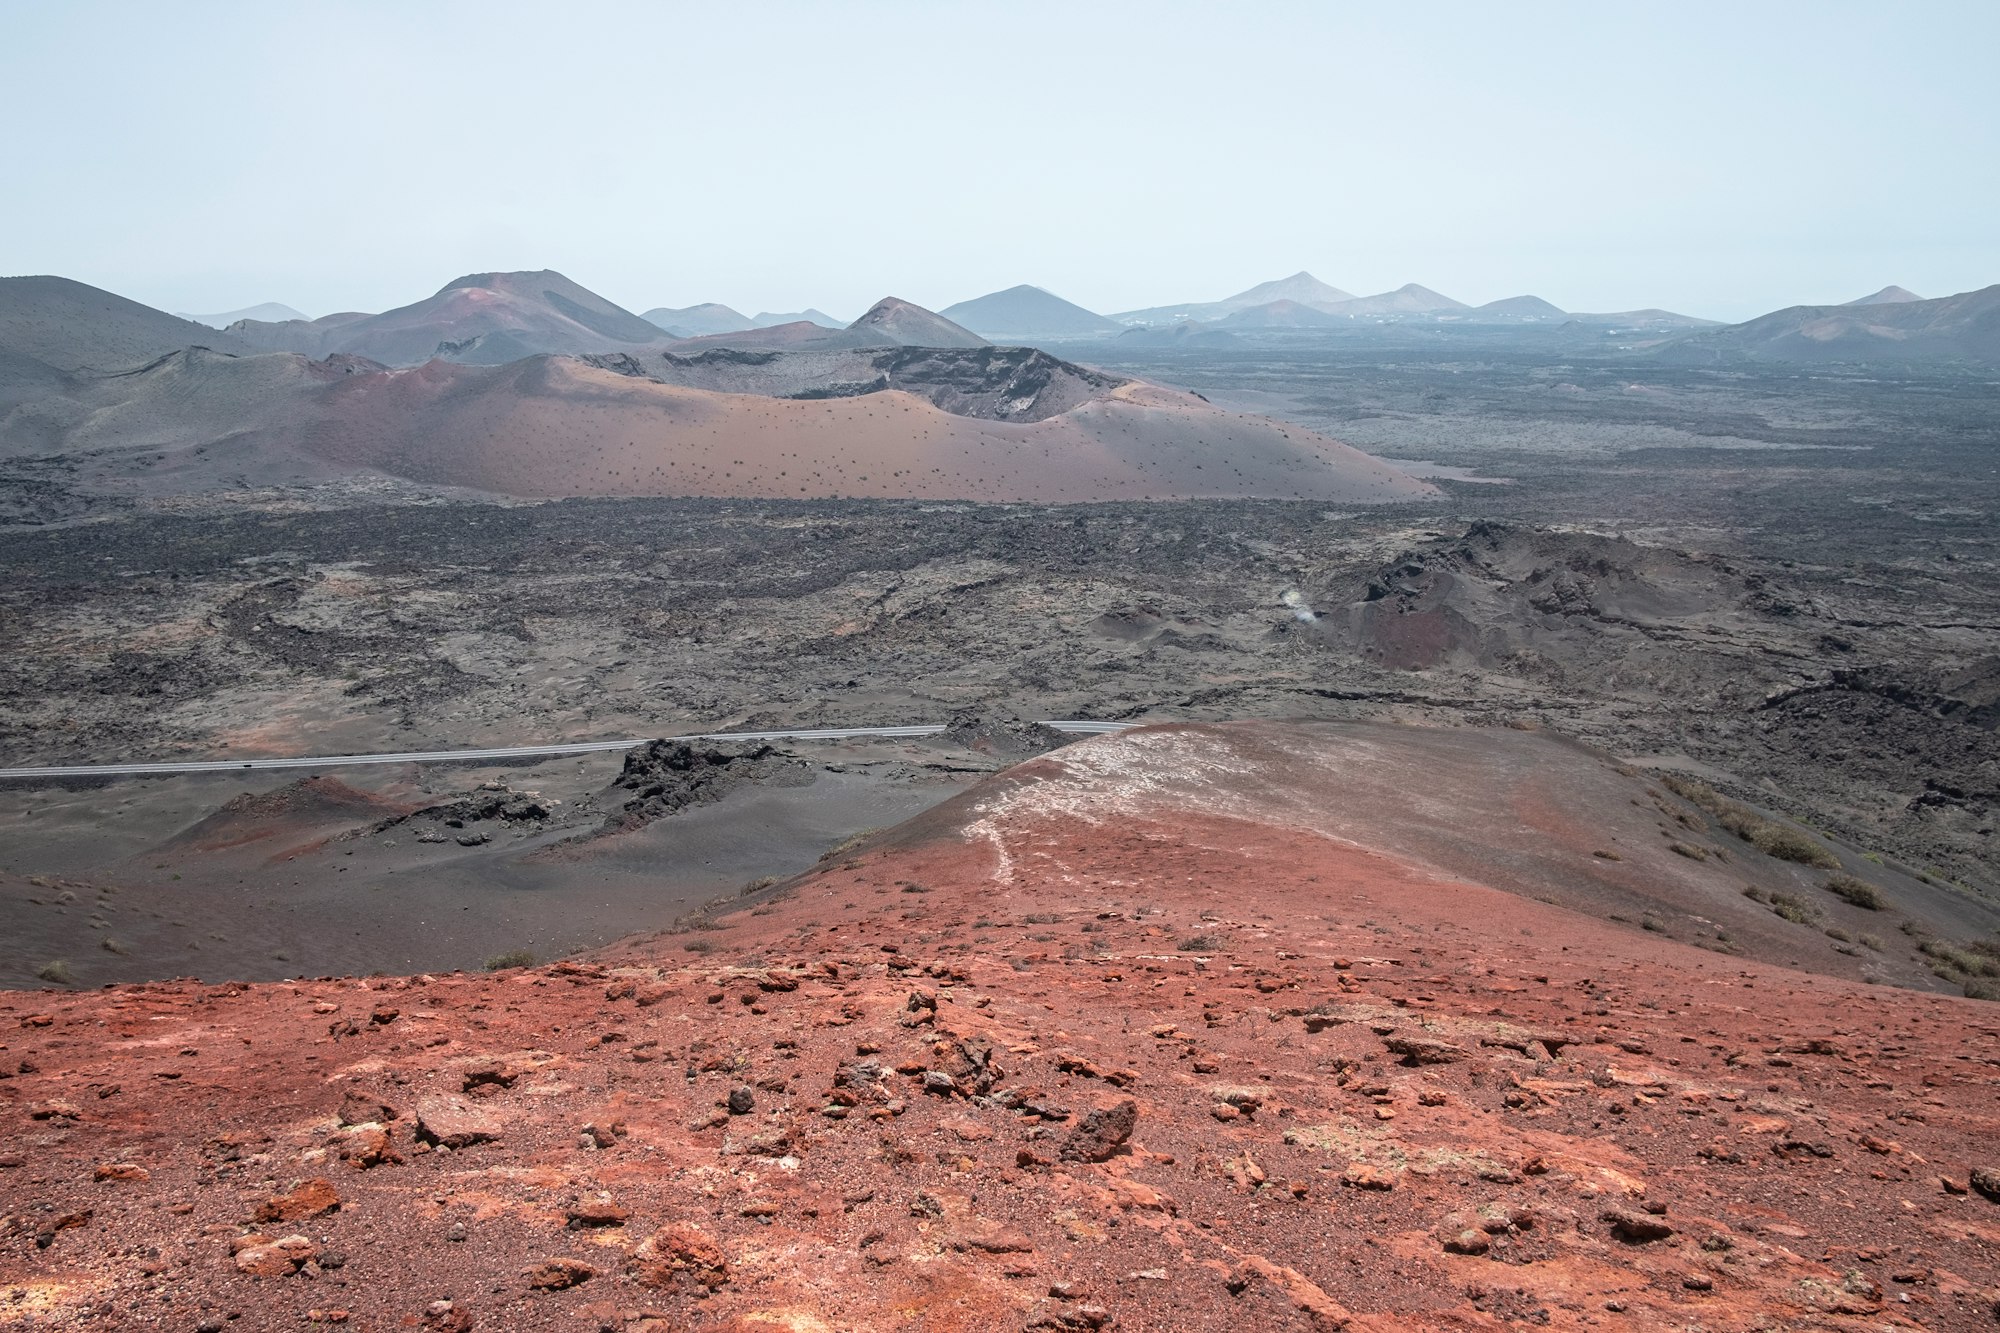 A view of a crater in the volcanic national park, Timanfaya, in Lanzarote (Canary Islands) in Spain.